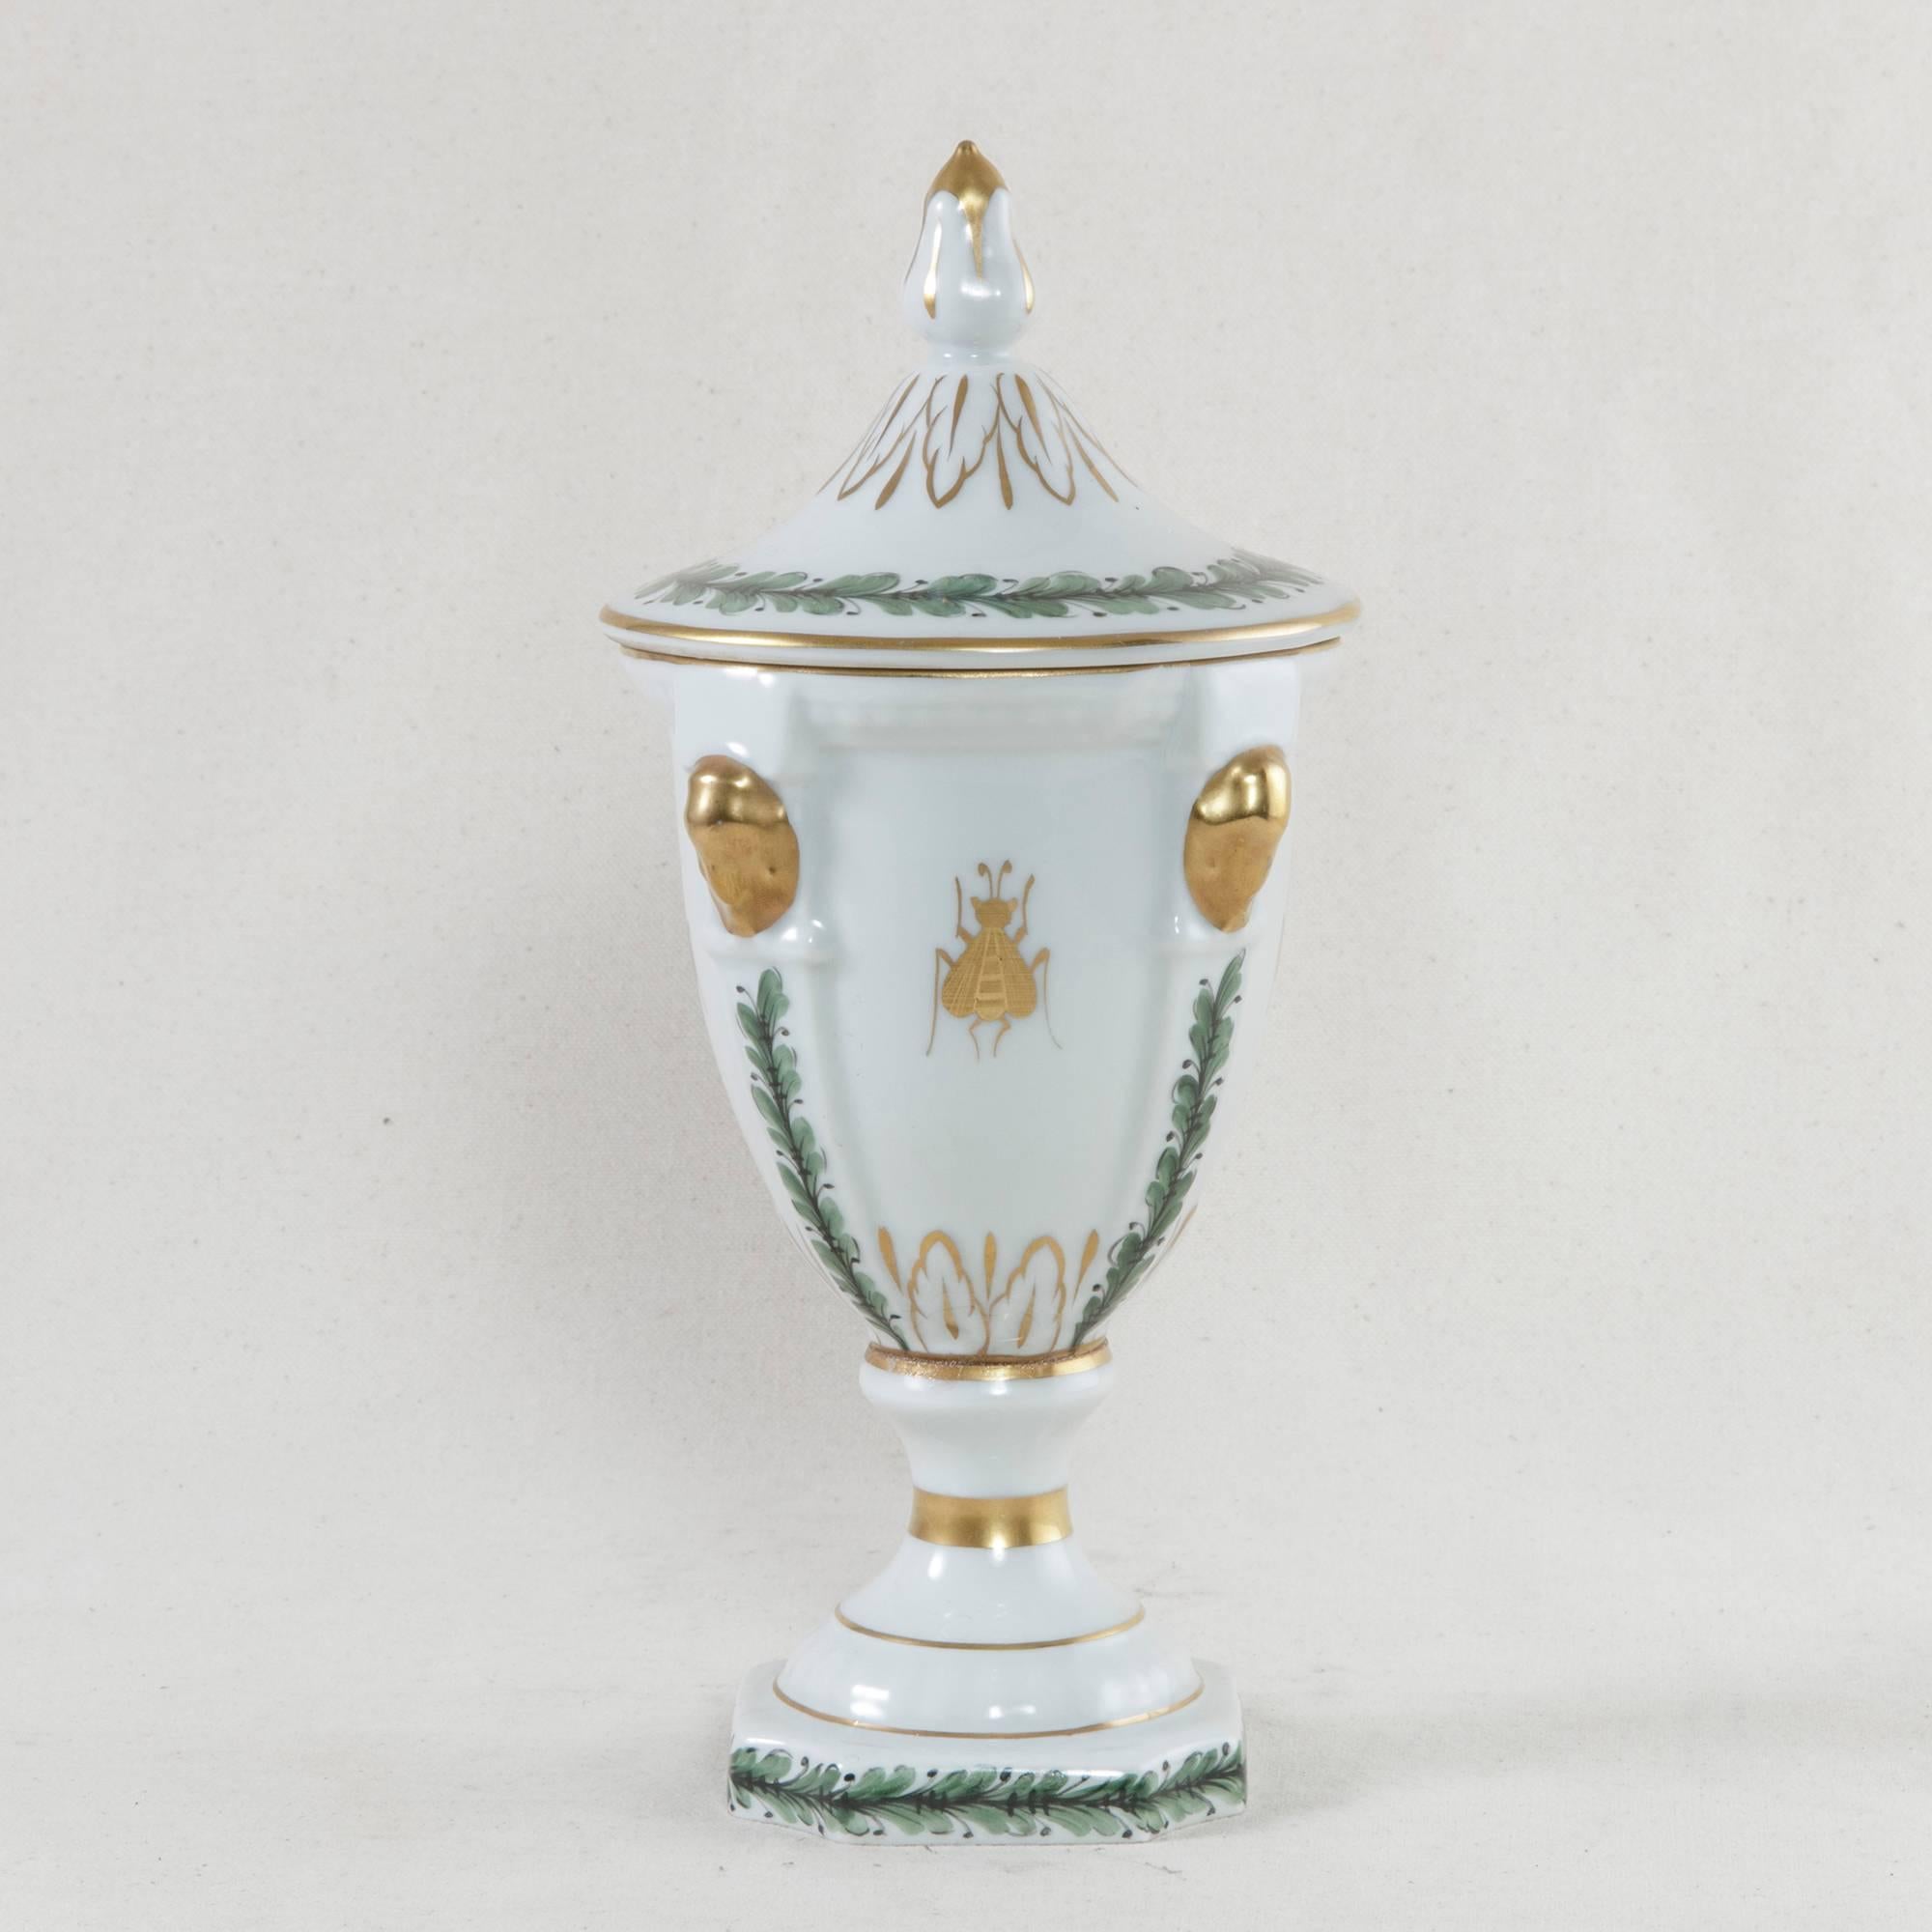 19th Century French Hand-Painted Porcelain Urn with Lid and Napoleonic Bee Motif 1